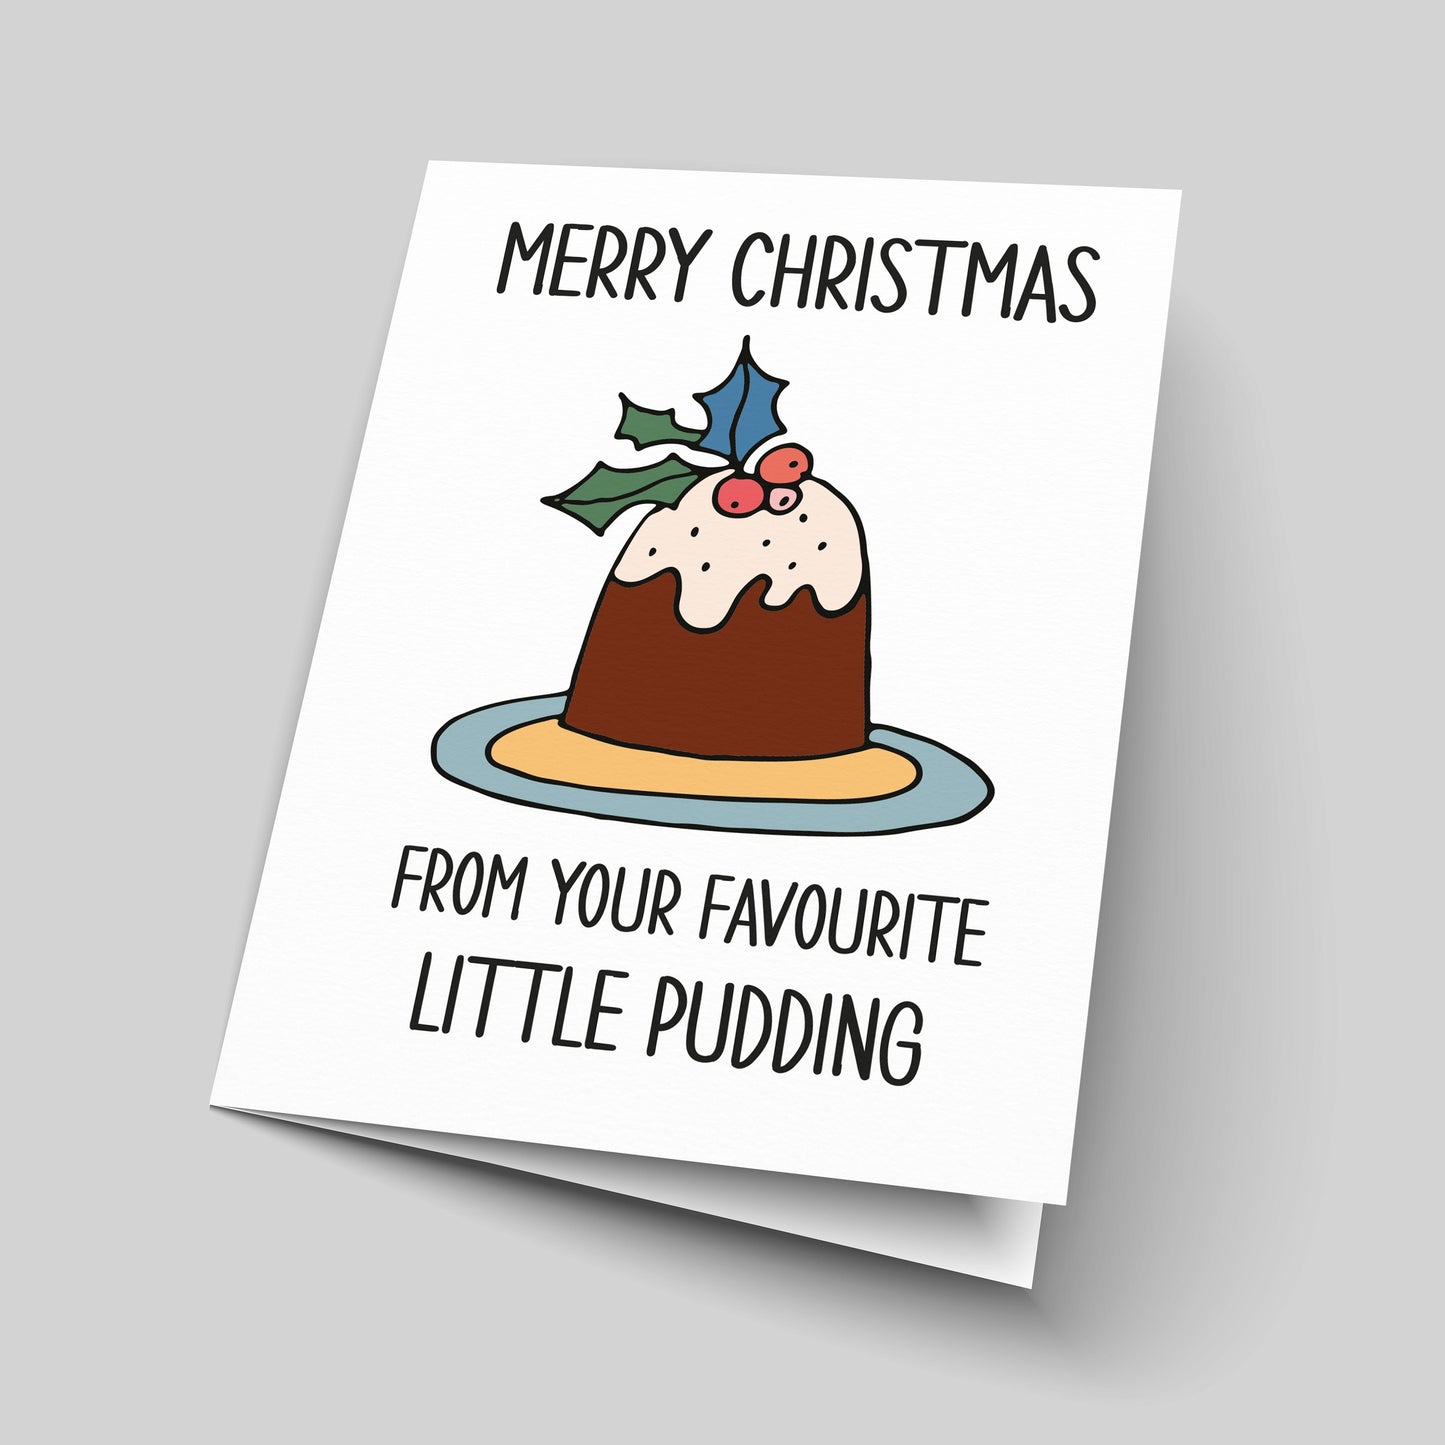 From Your Little Pudding Childrens Xmas Cards